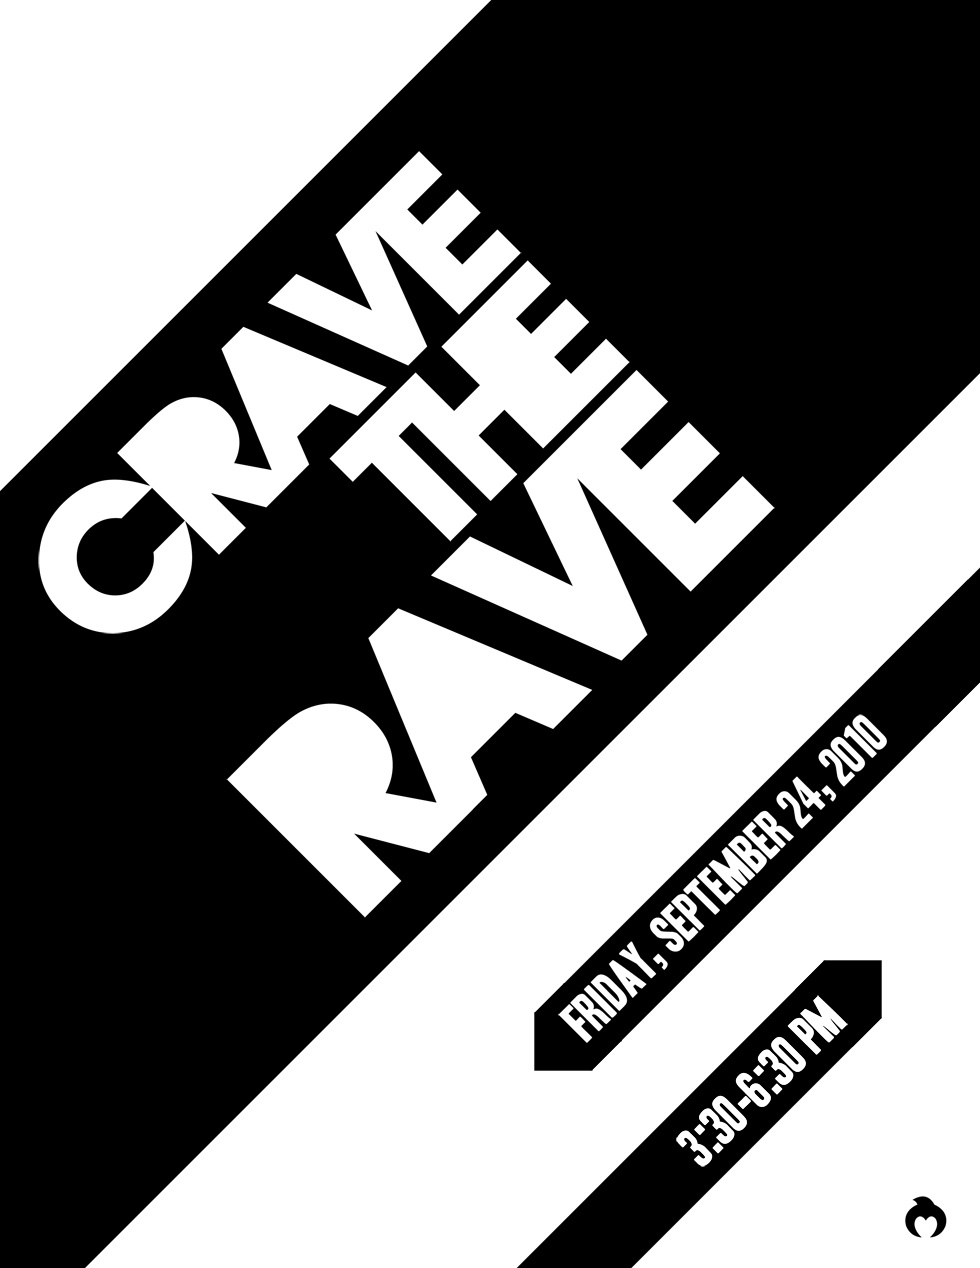 Crave the Rave - 1